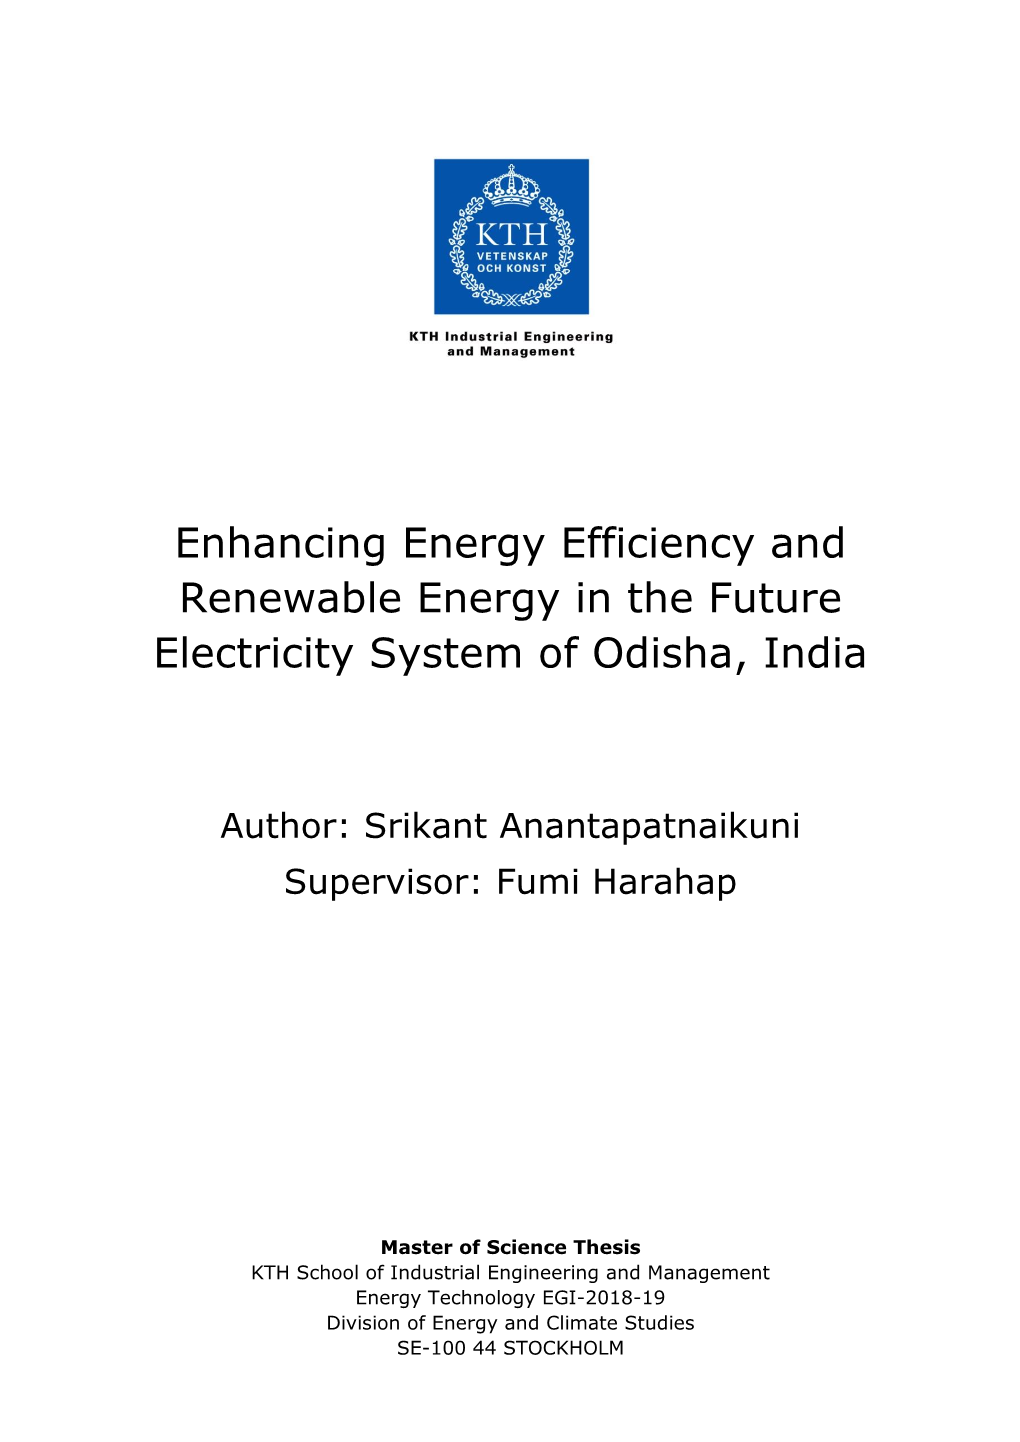 Enhancing Energy Efficiency and Renewable Energy in the Future Electricity System of Odisha, India